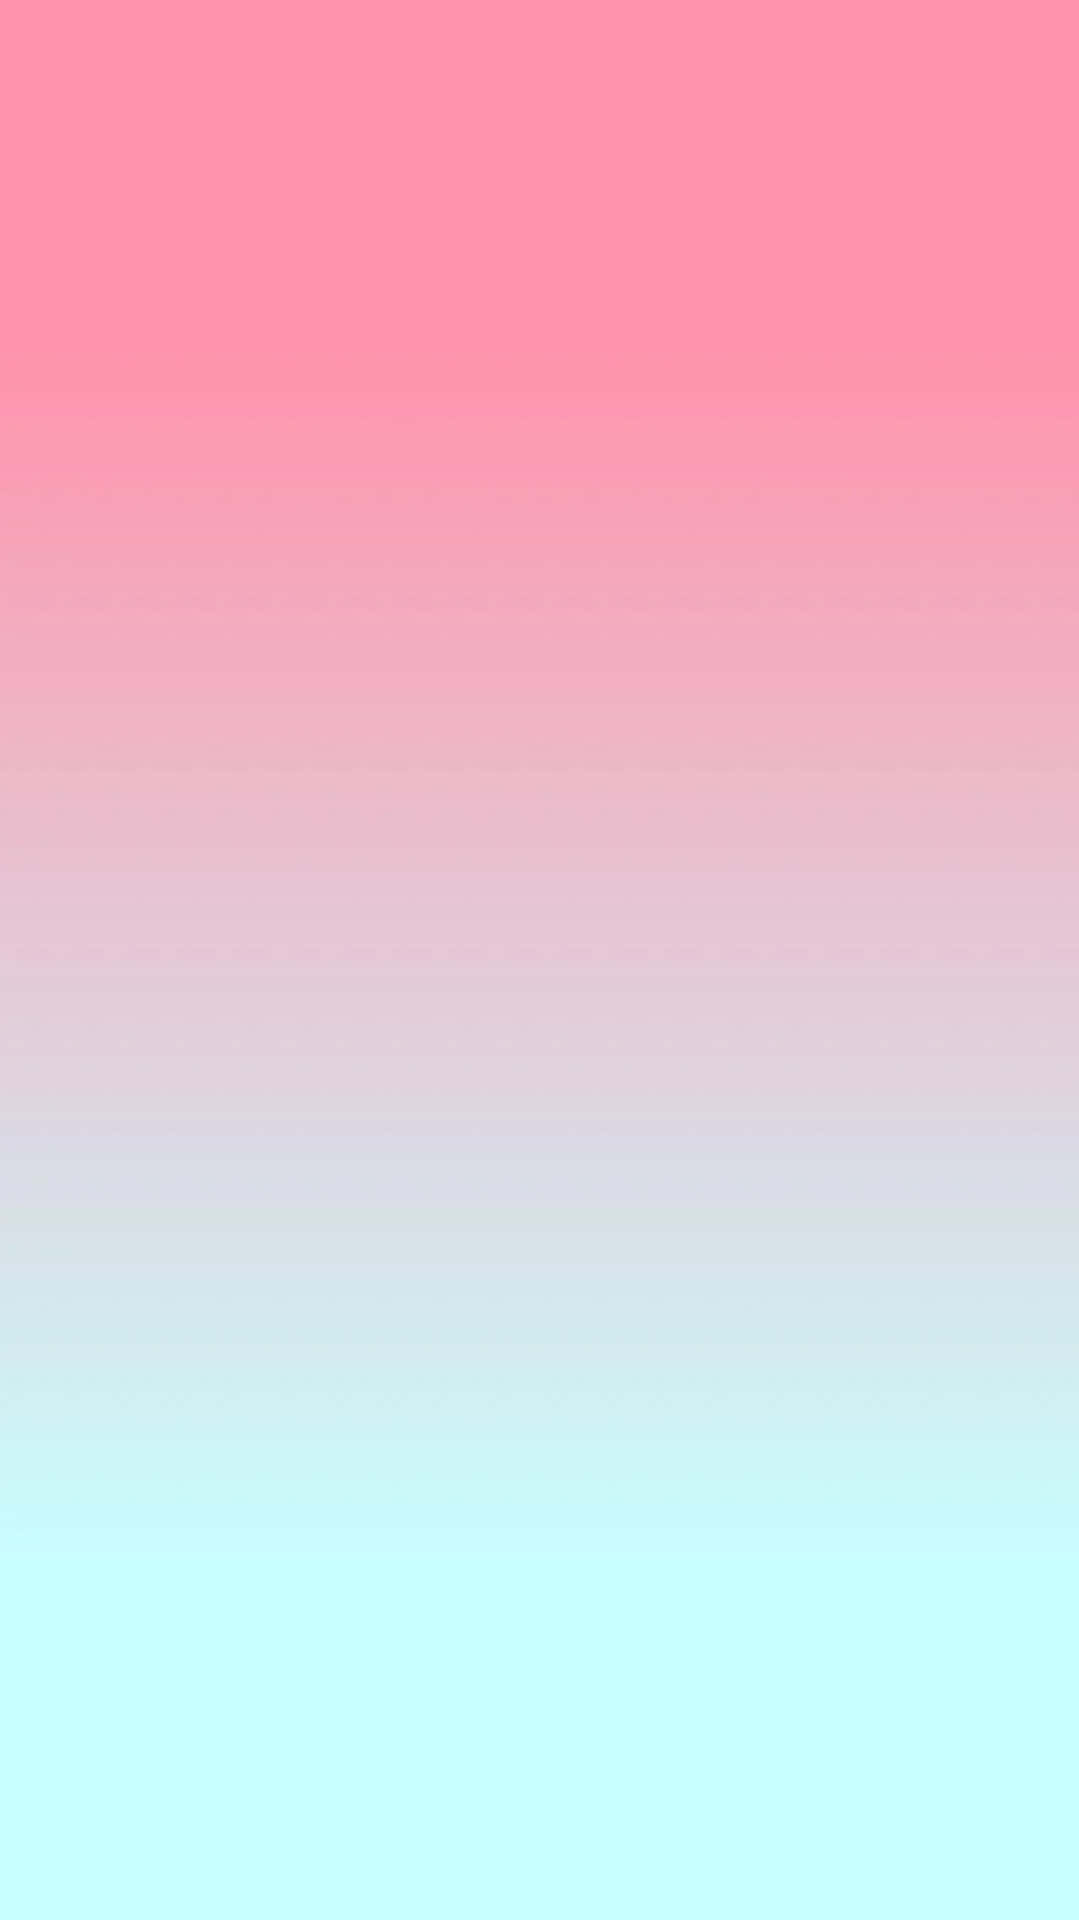 Pastel Gradient Background Pink And Teal